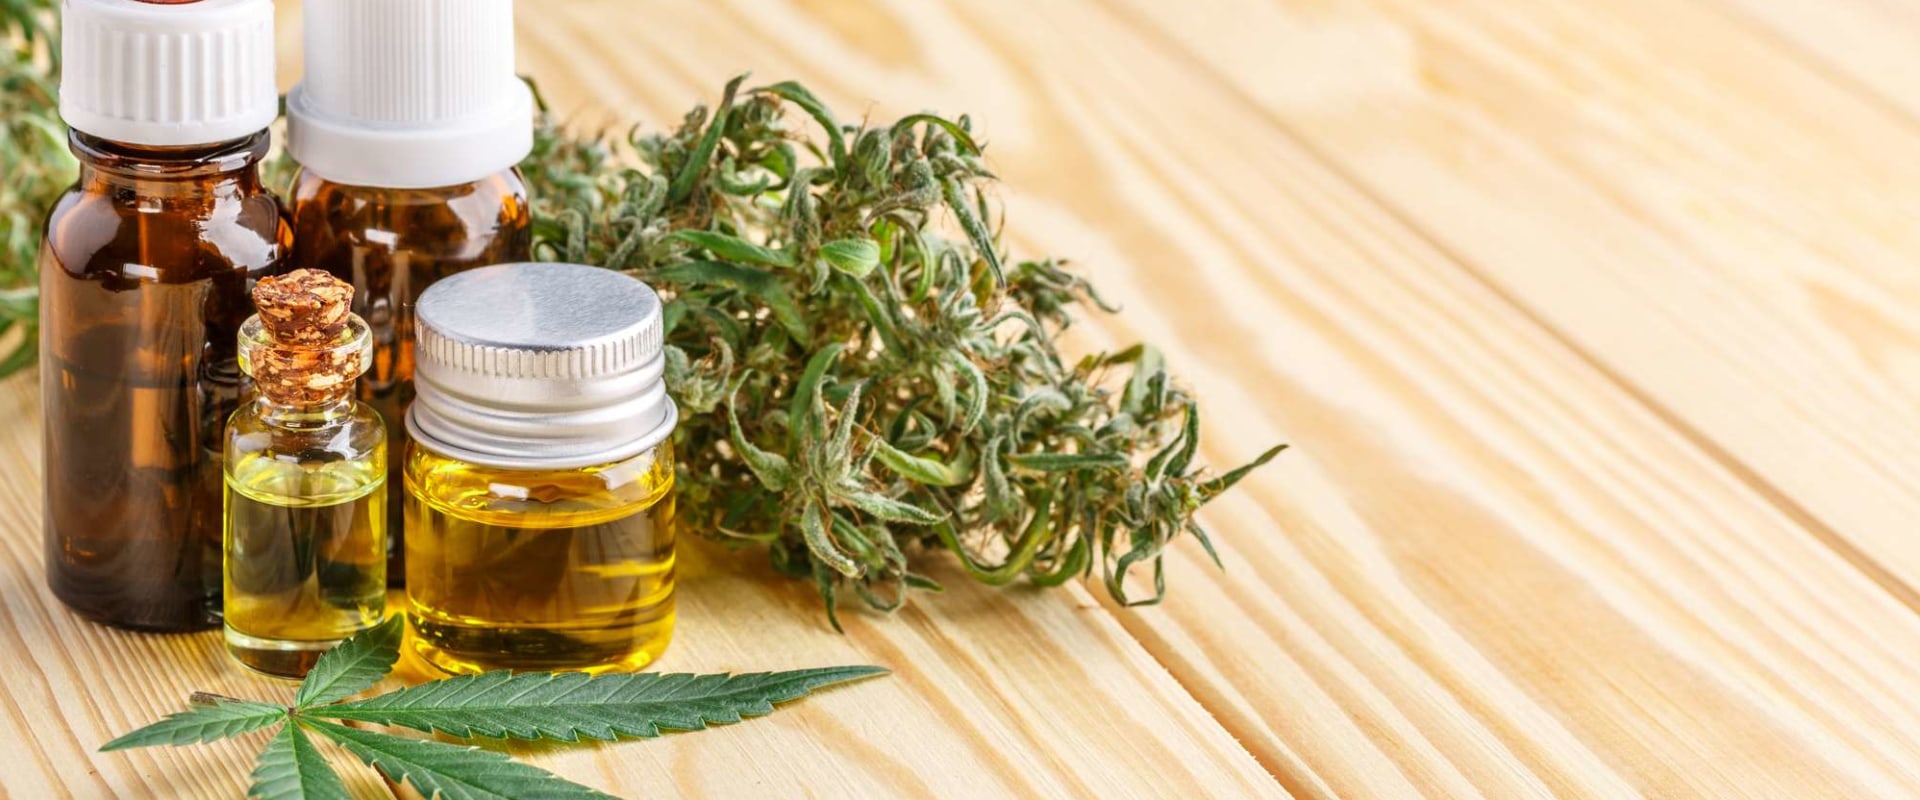 Natural Remedies: Exploring CBD And THC Oil Benefits In California